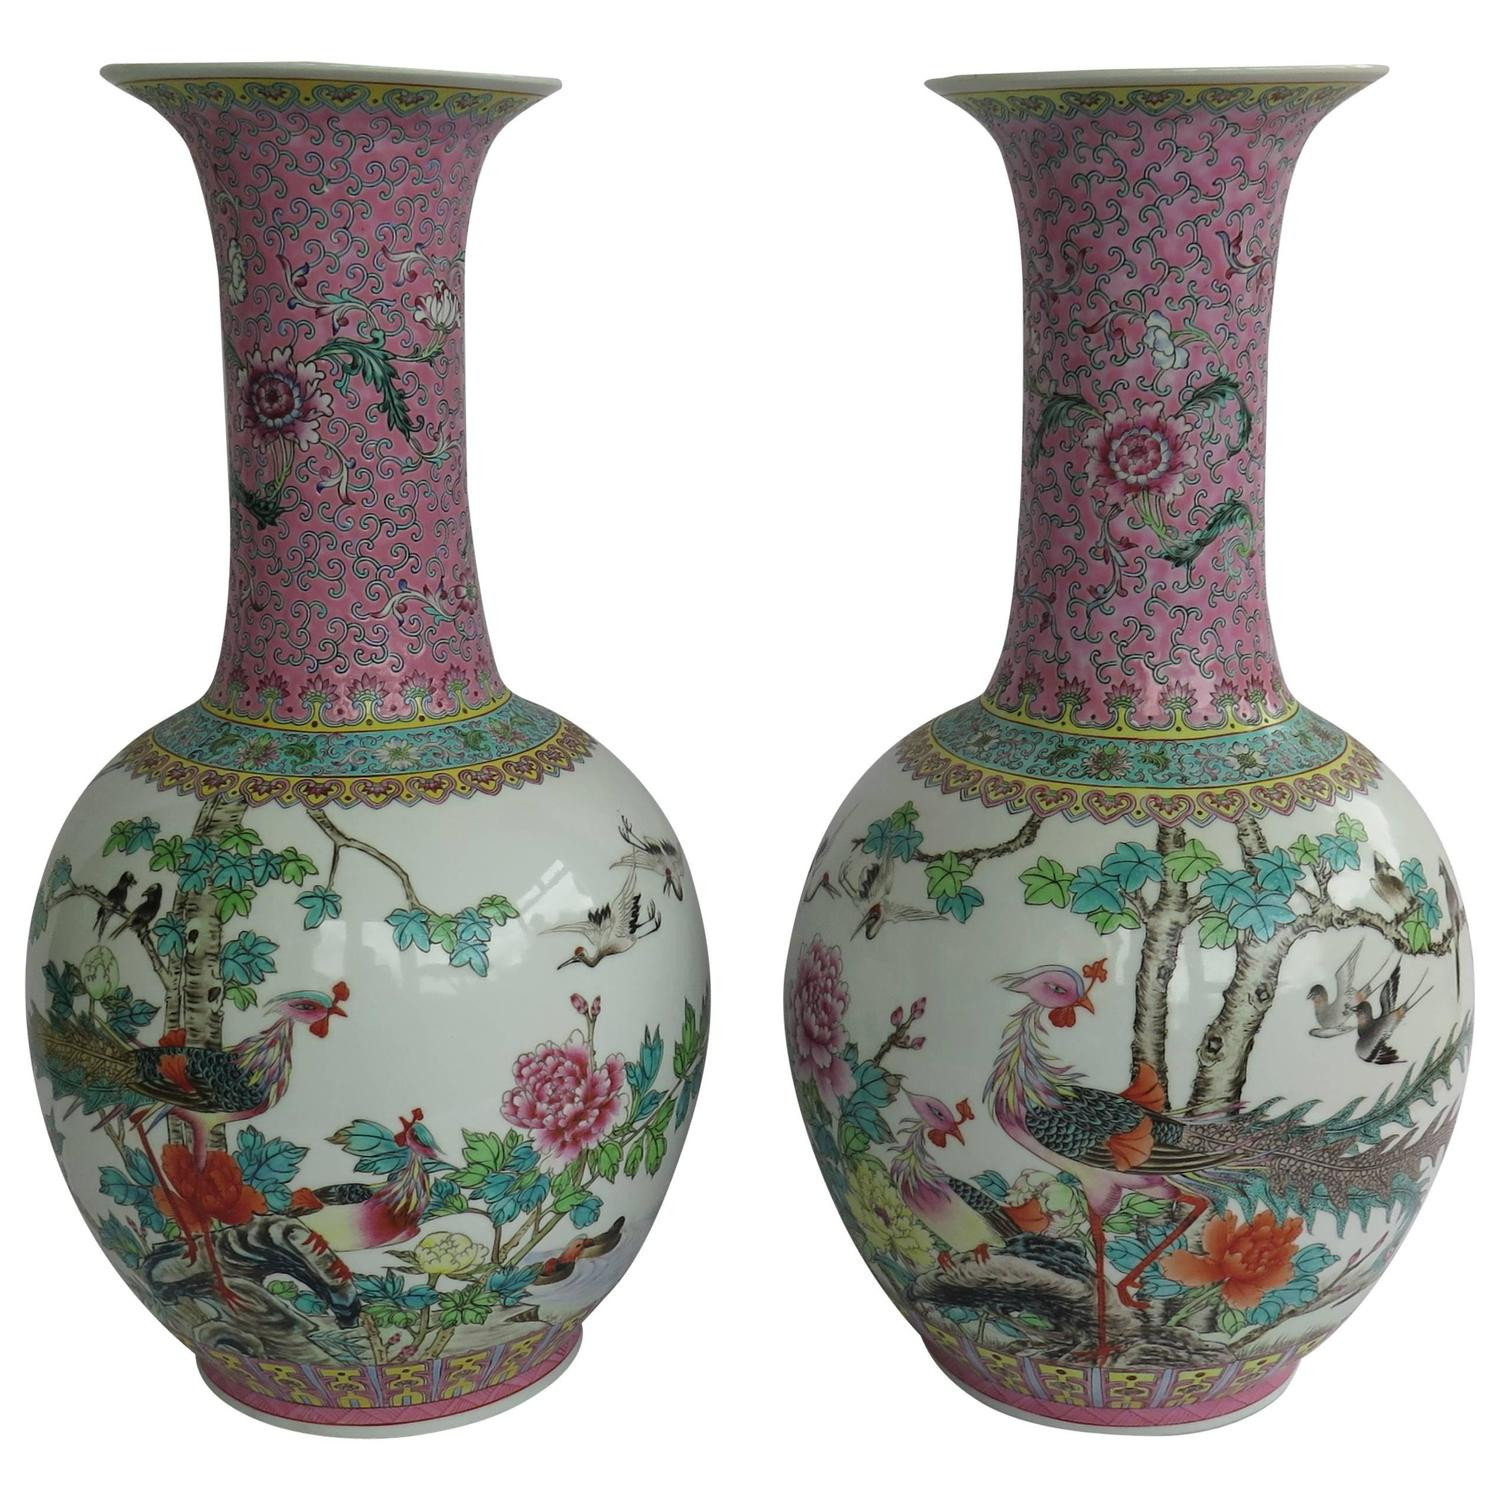 20 Fabulous Chinese Porcelain Vases for Sale 2023 free download chinese porcelain vases for sale of pair of chinese antique canton famille rose porcelain vases for sale within pair of chinese antique canton famille rose porcelain vases for sale at 1stdib